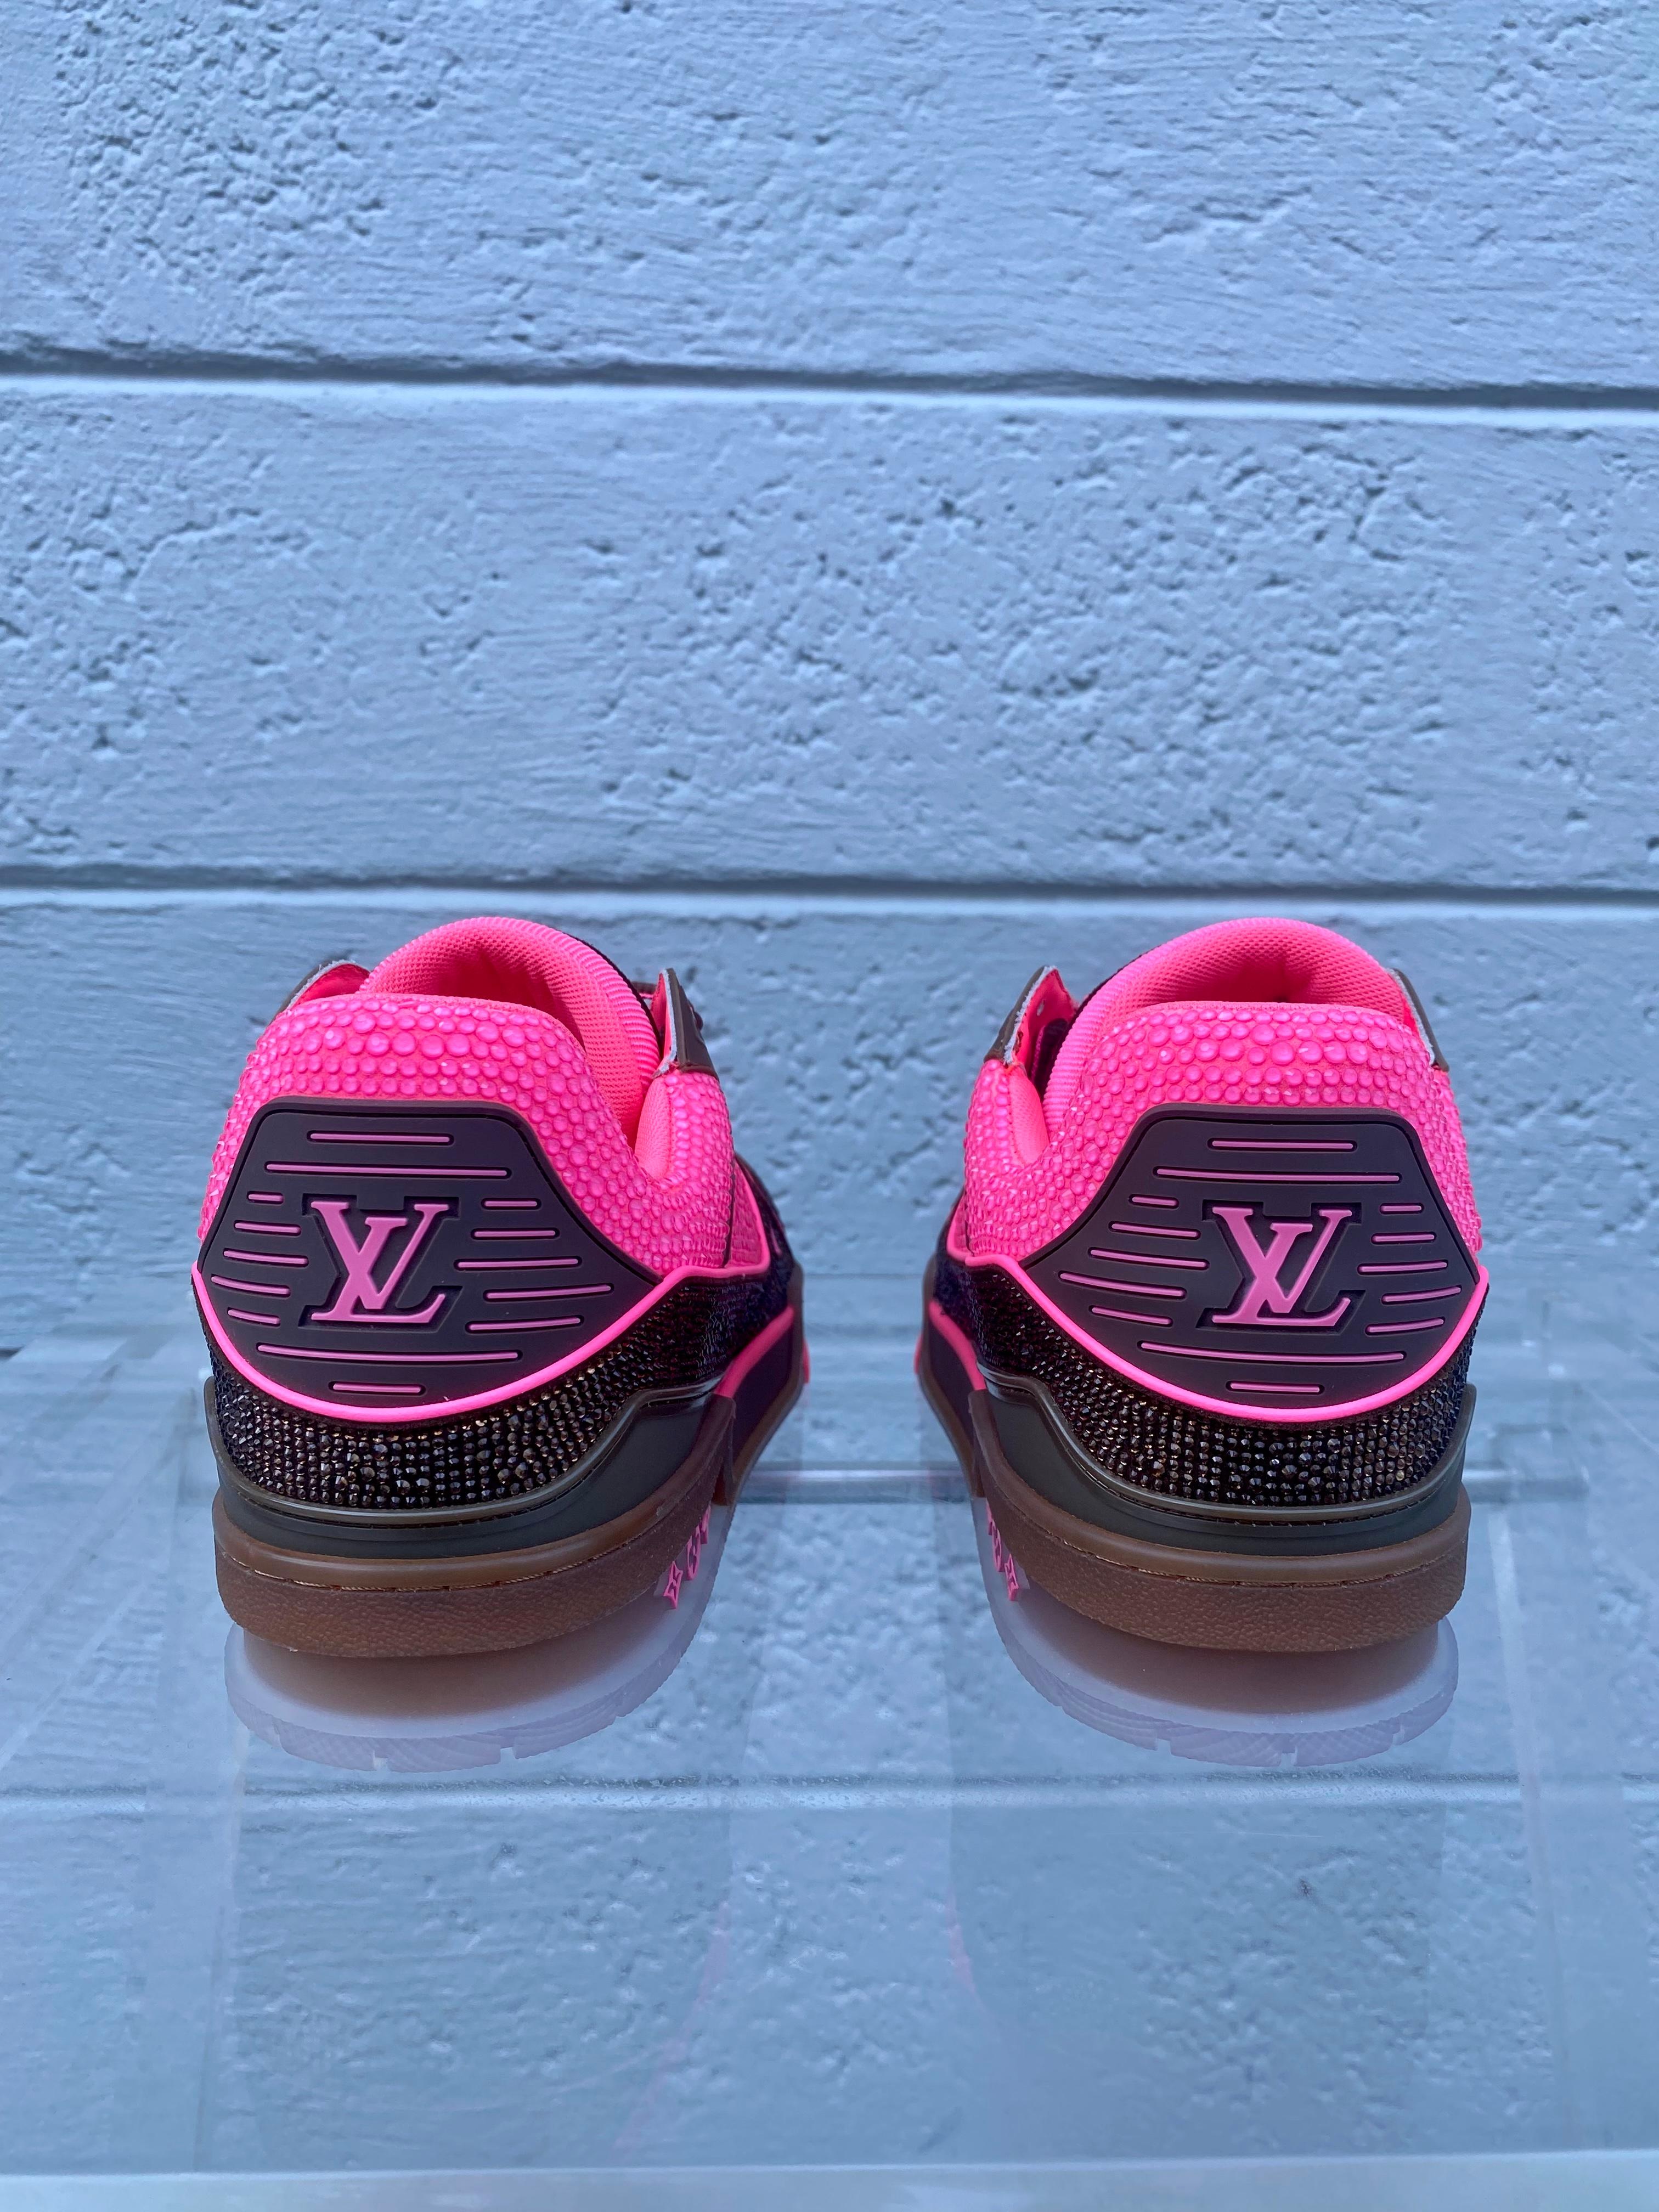 New Rare Limited Edition Louis Vuitton Pink shoes For Sale 1